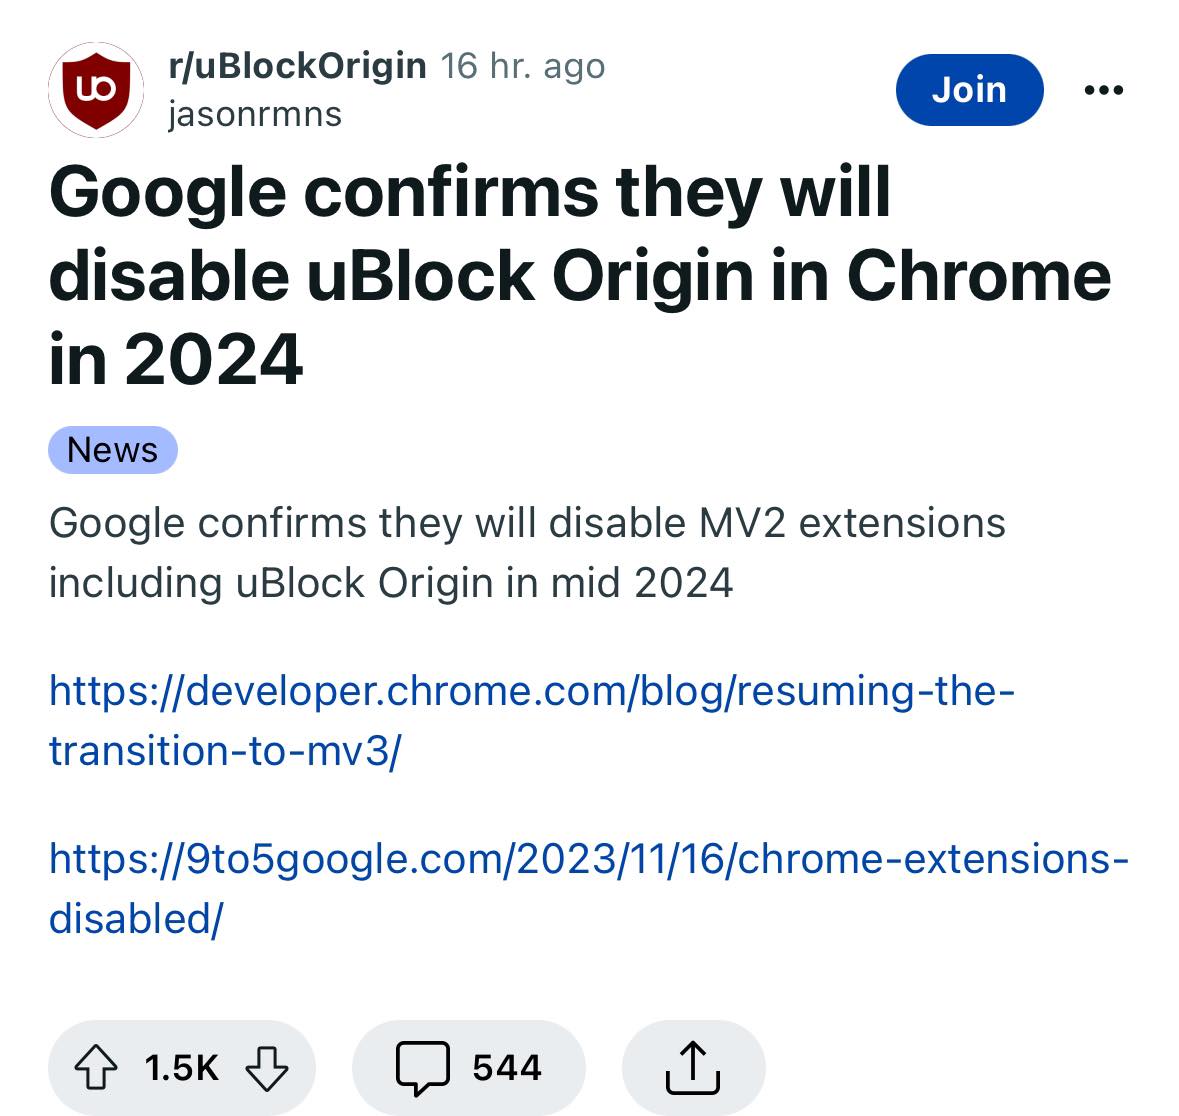 Google confirms they will disable uBlock Origin in Chrome in 2024 